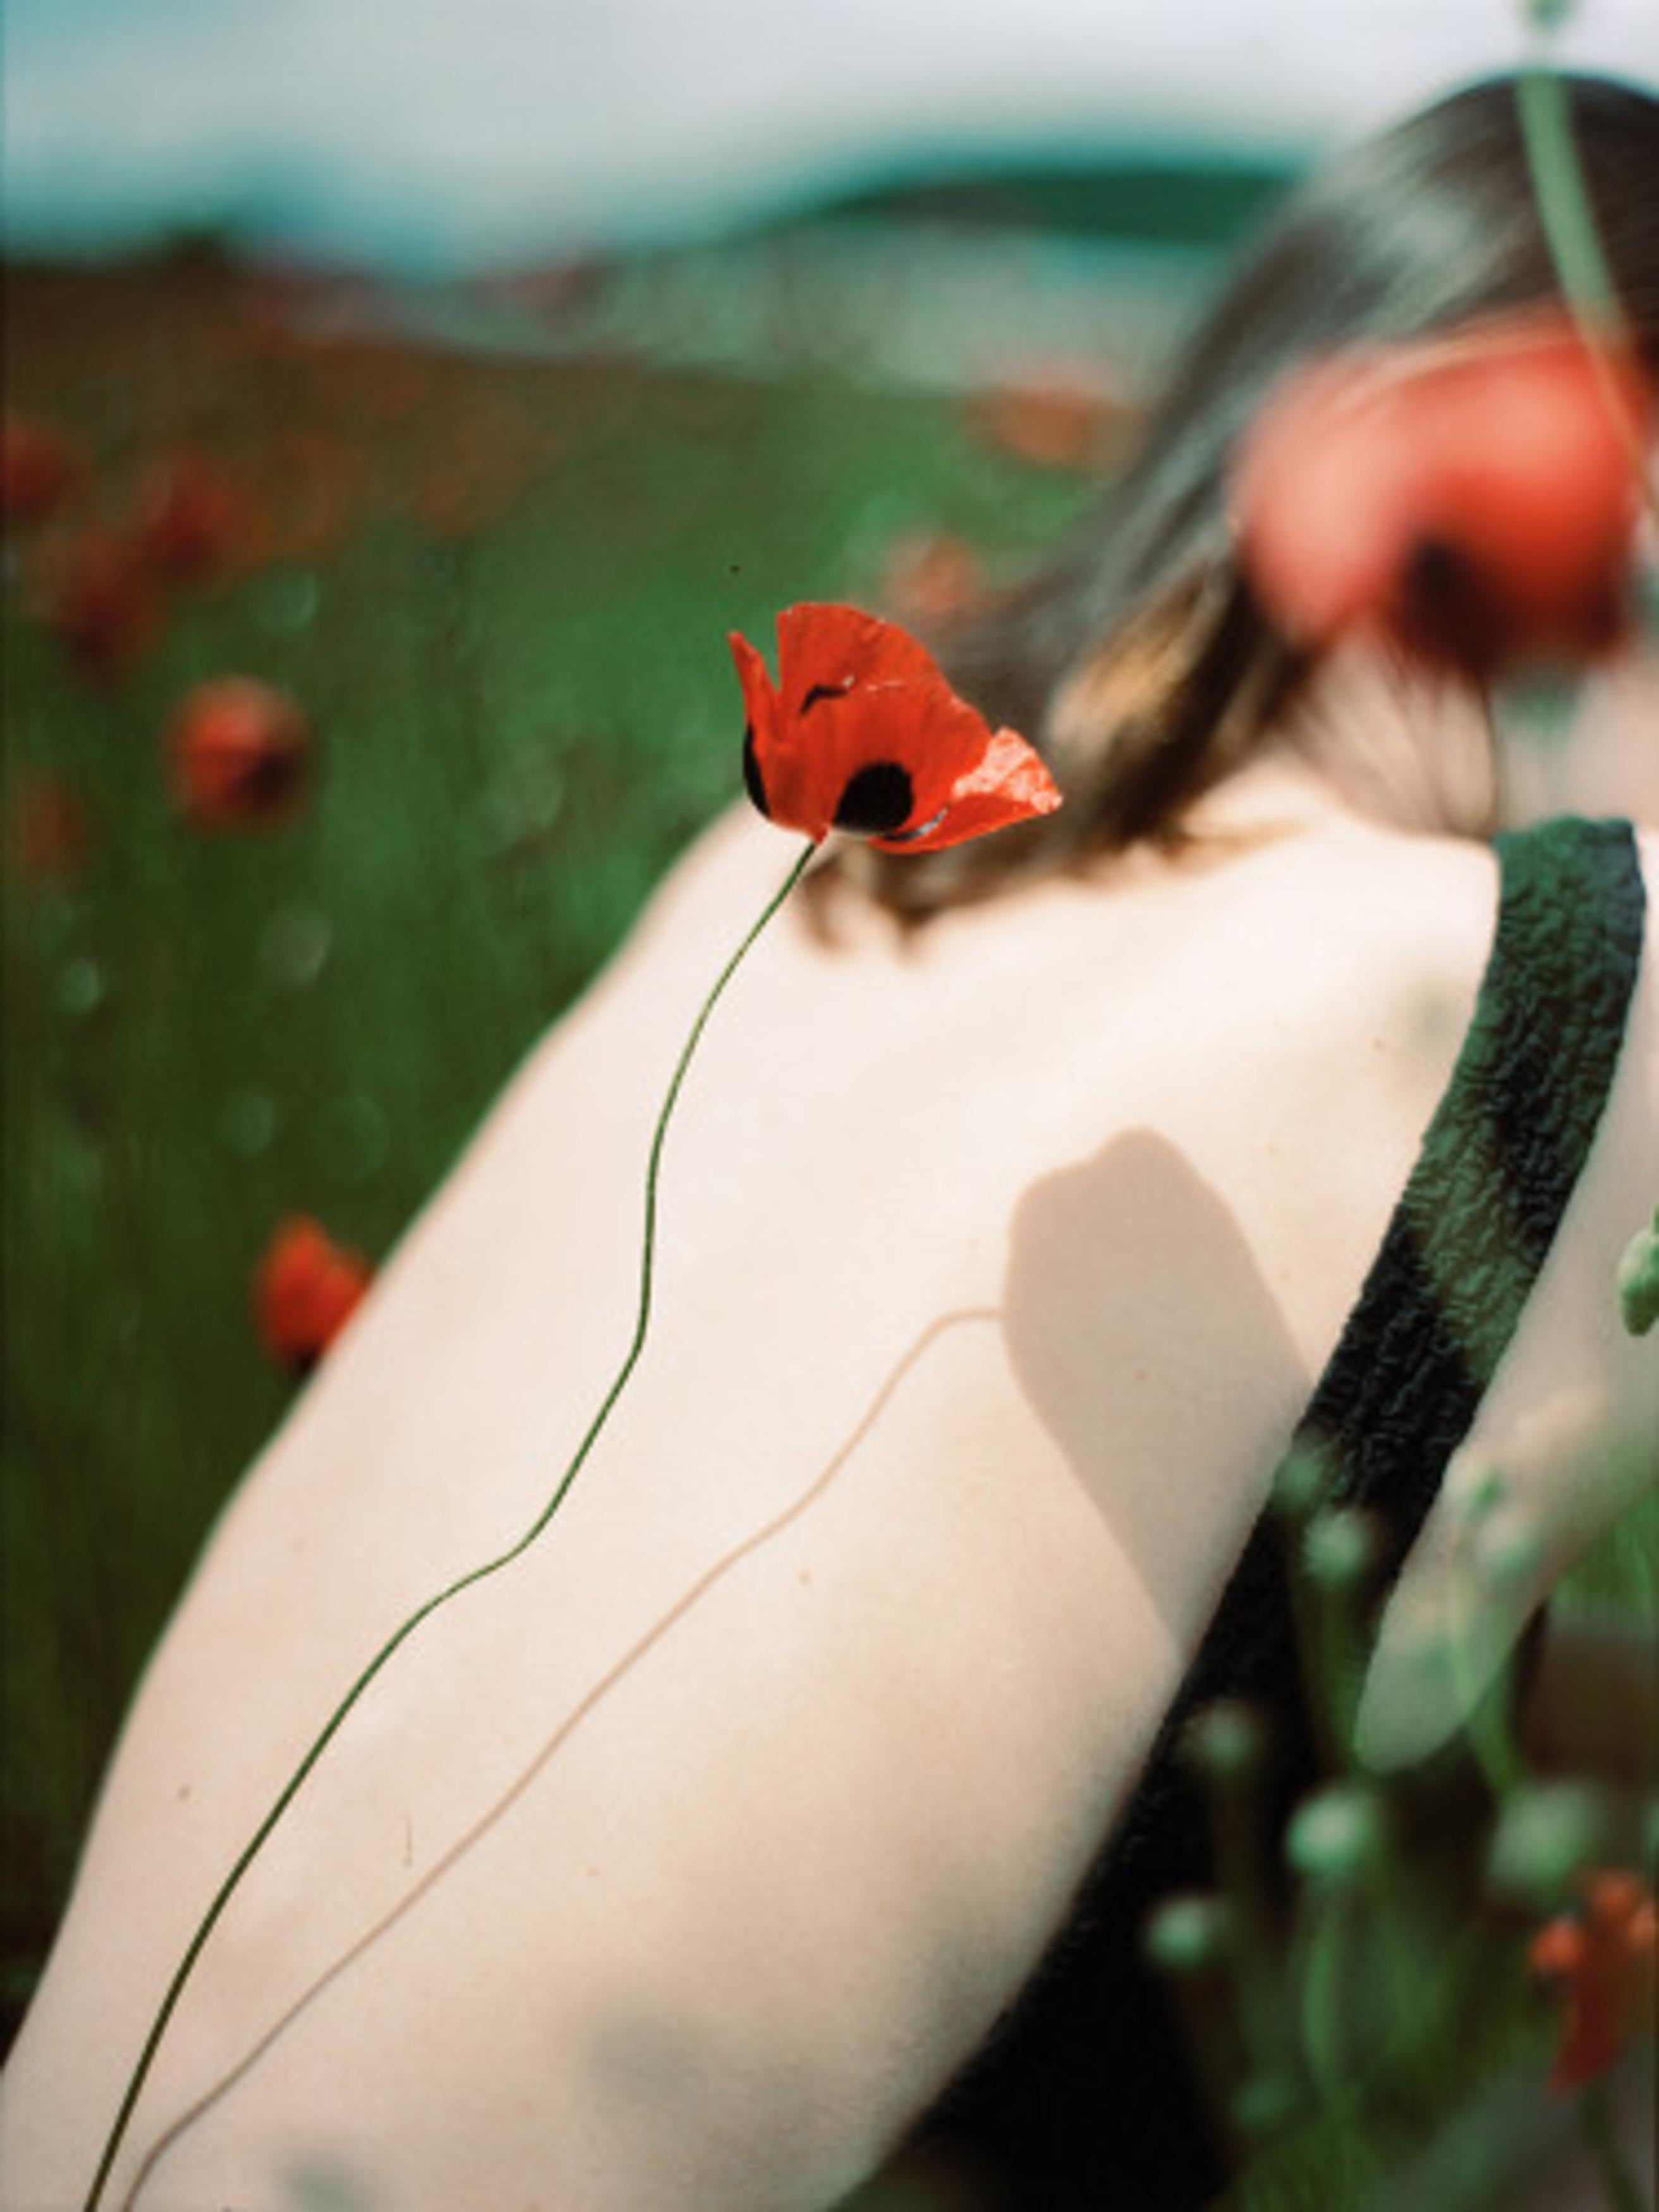 Picnic in a Poppy Field 2 - Photograph by Mariam Sitchinava